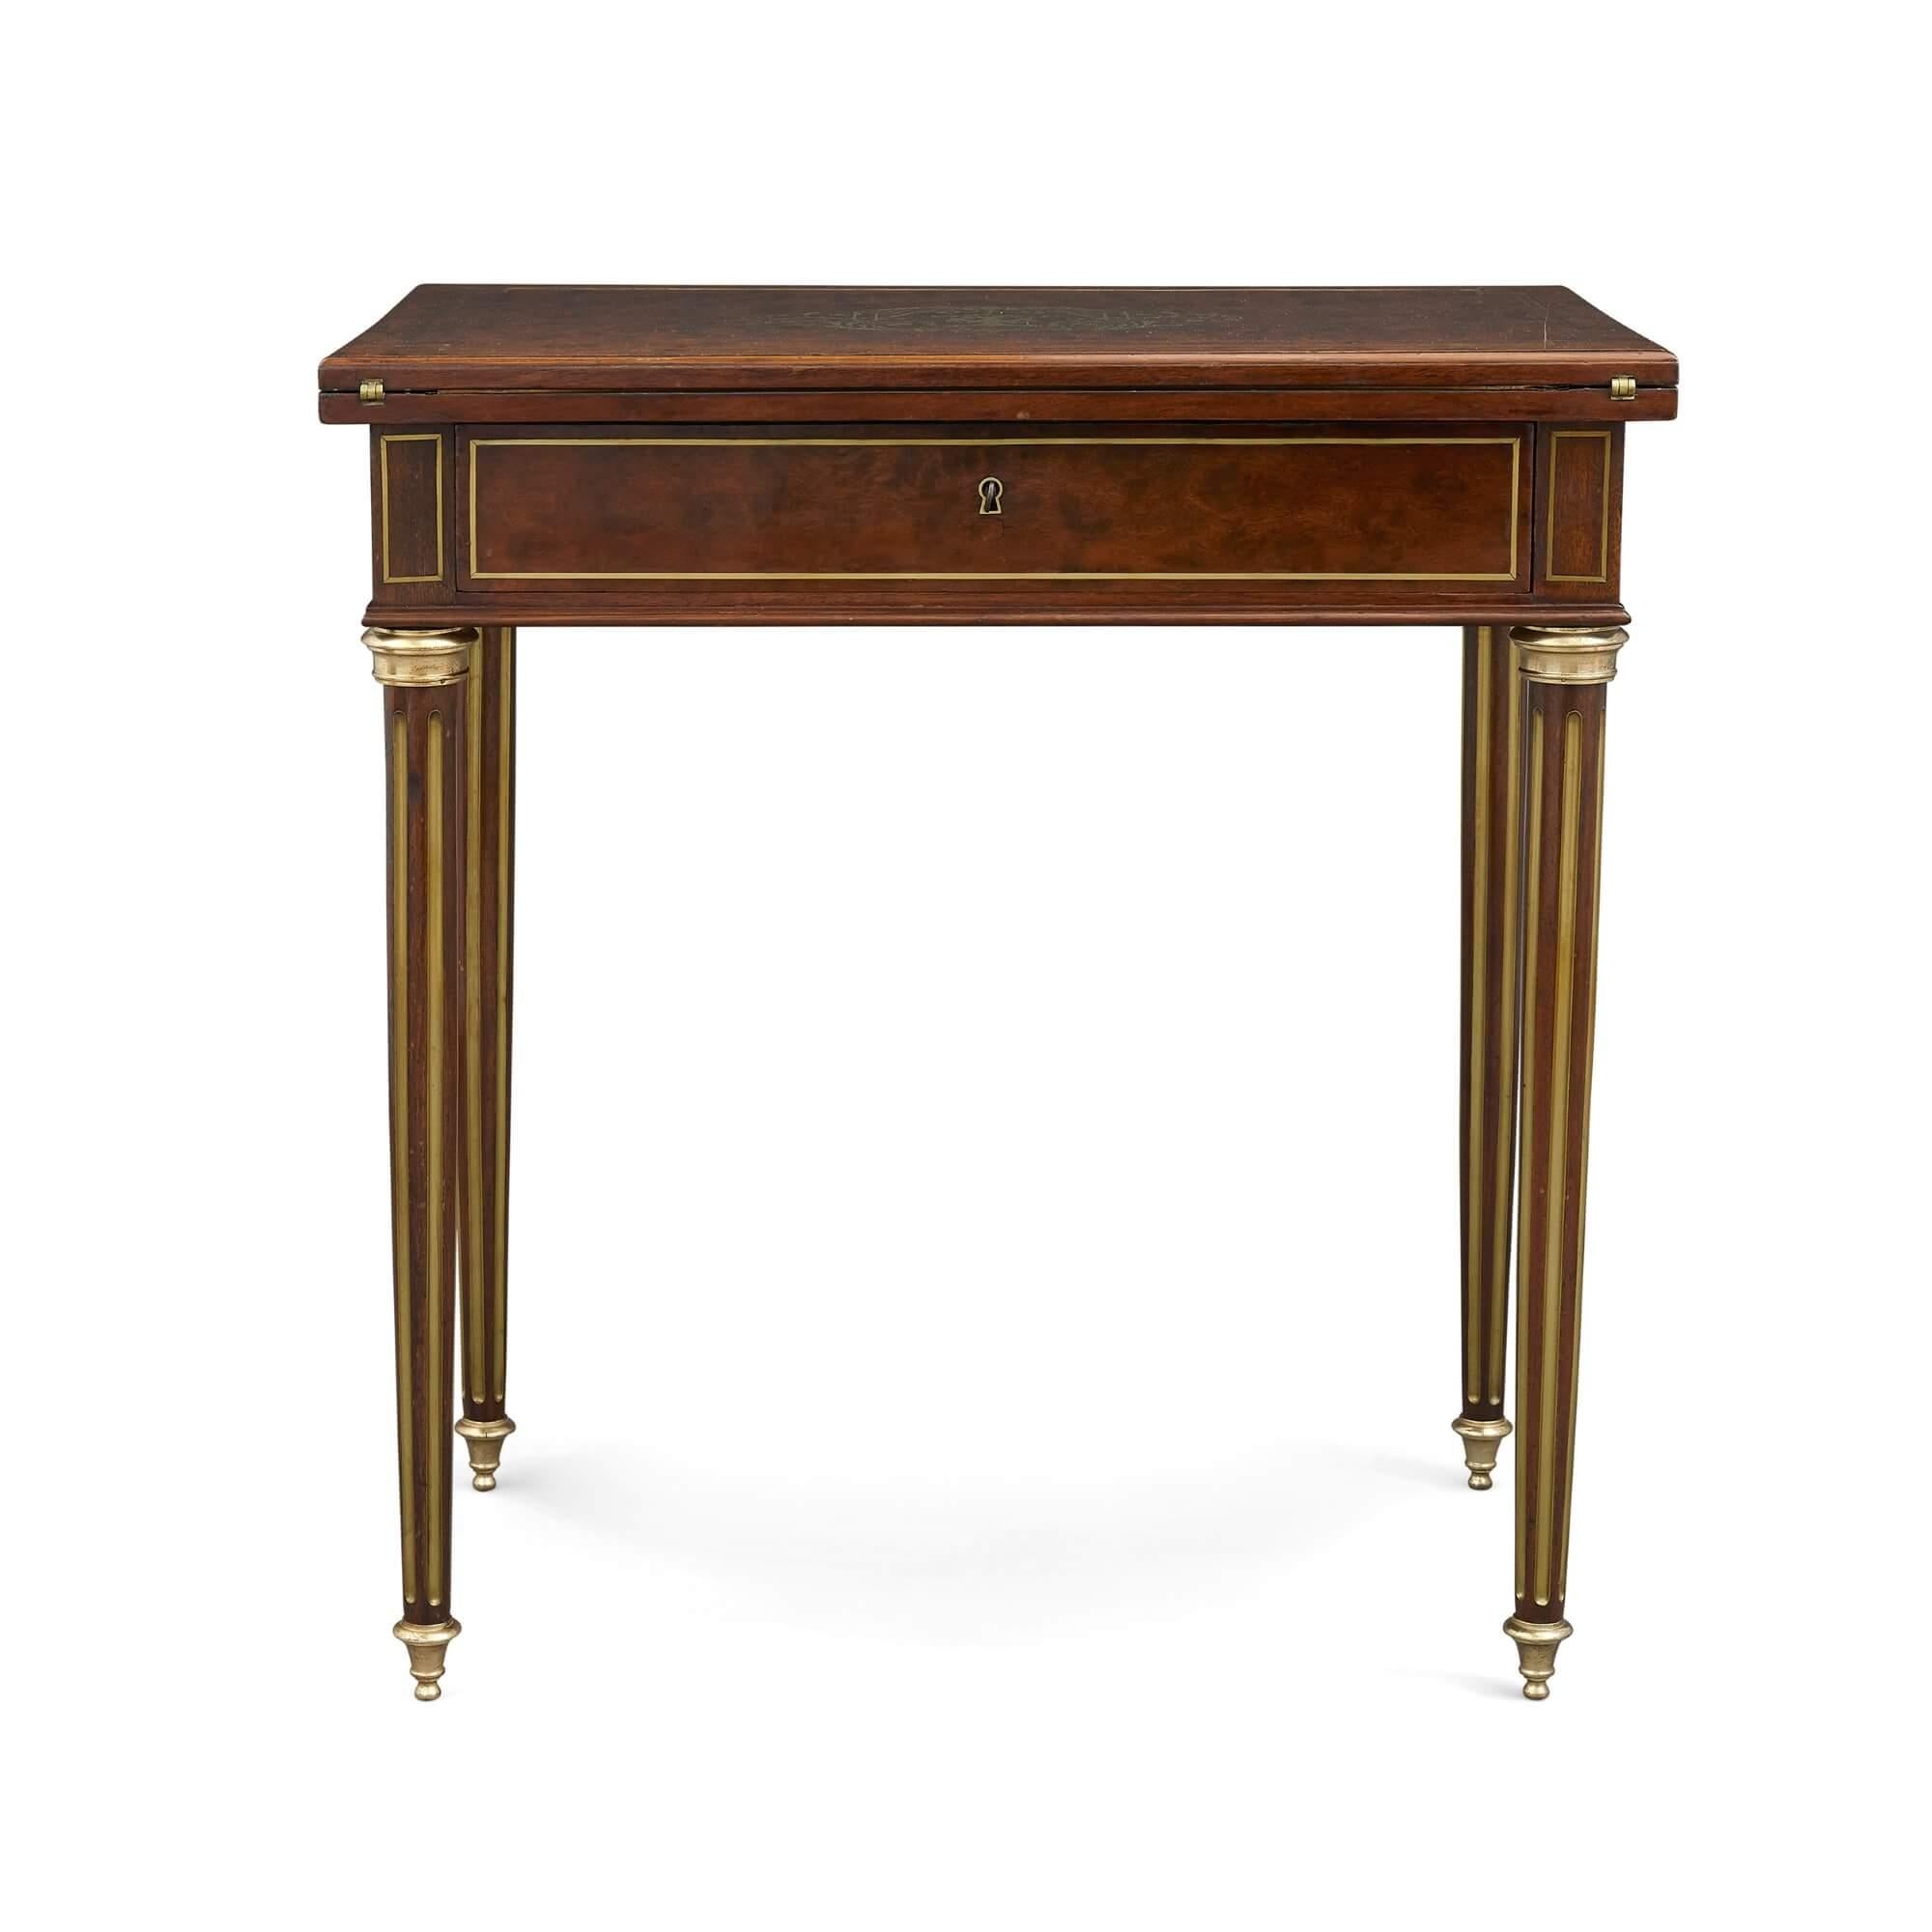 Neoclassical style mahogany card, dressing, and writing table
French, 19th century
Measures: Height 75cm, width 70cm, depth 45cm

This charming table is an ingenious piece of design. The table serves three functions: it works as a writing desk,